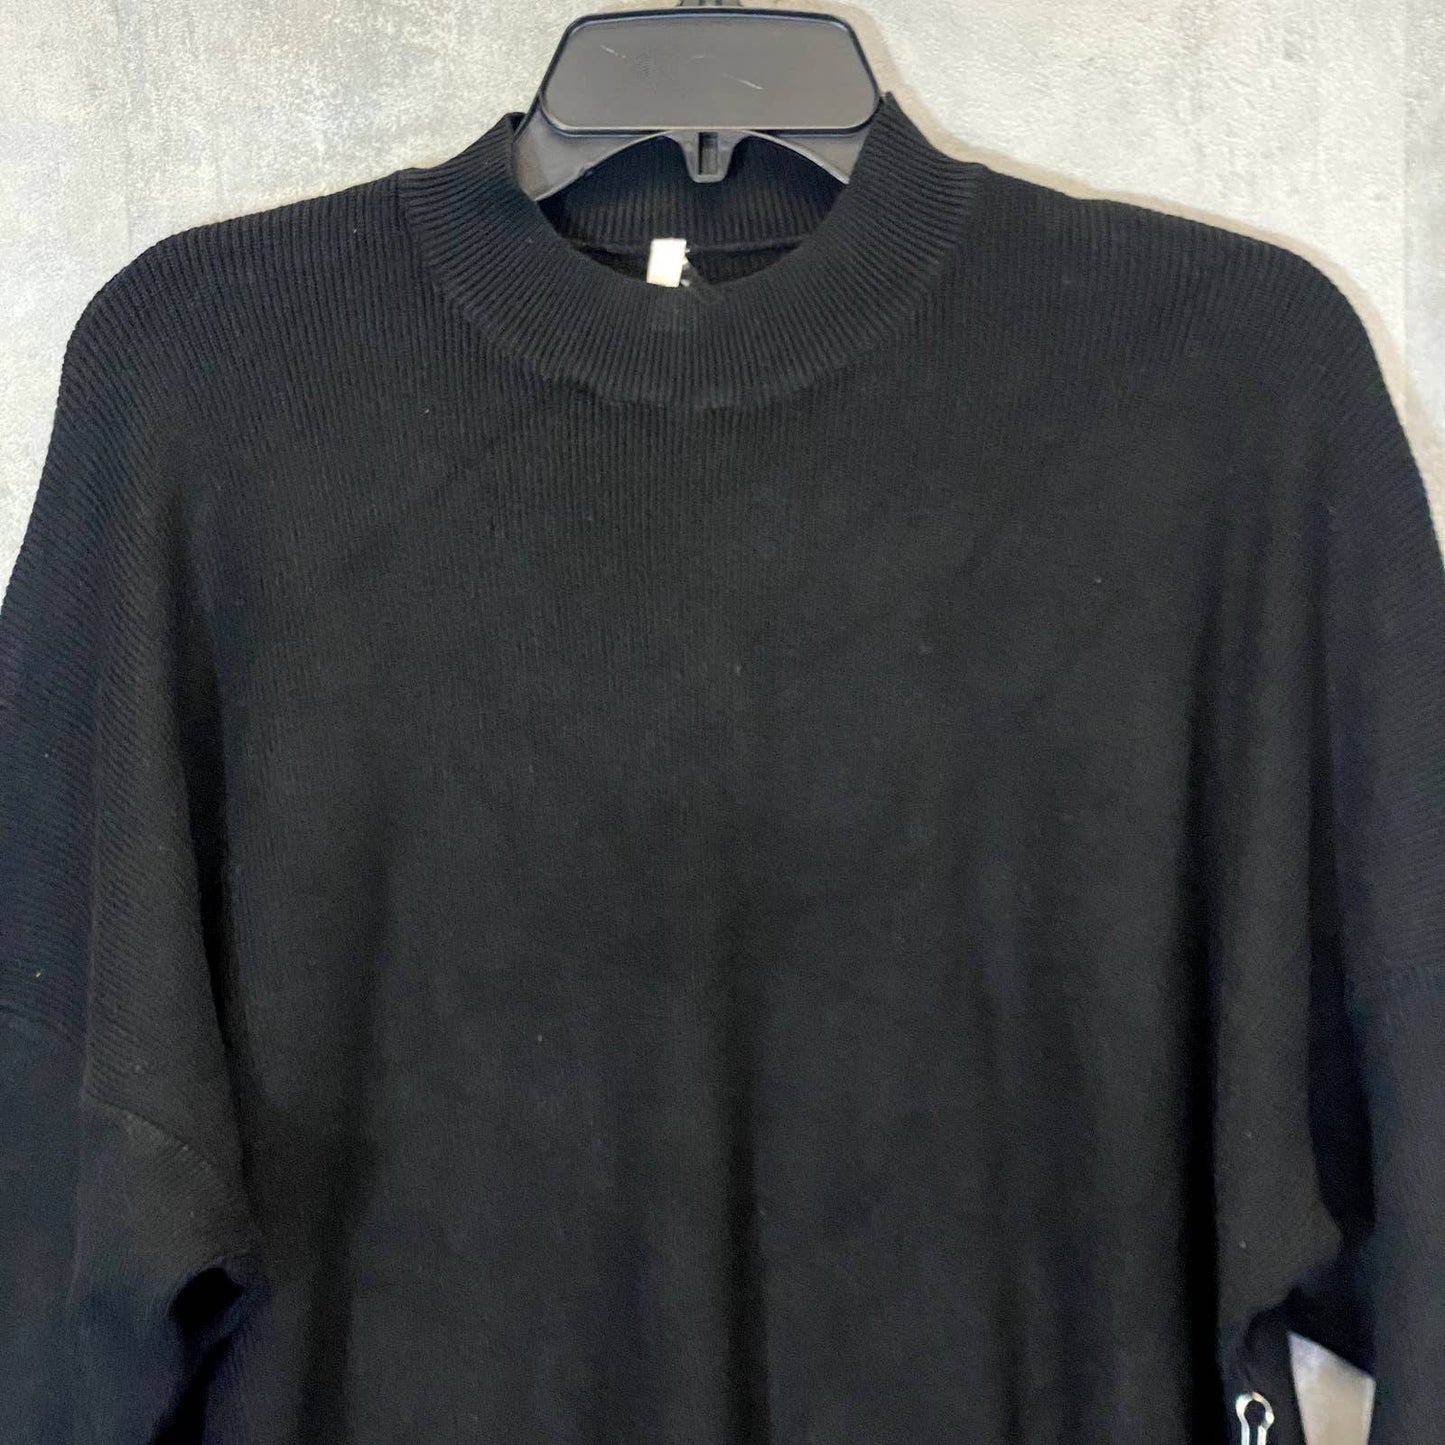 DREAMERS BY DEBUT Women's Black Oversized High Neck Pullover Sweater SZ L